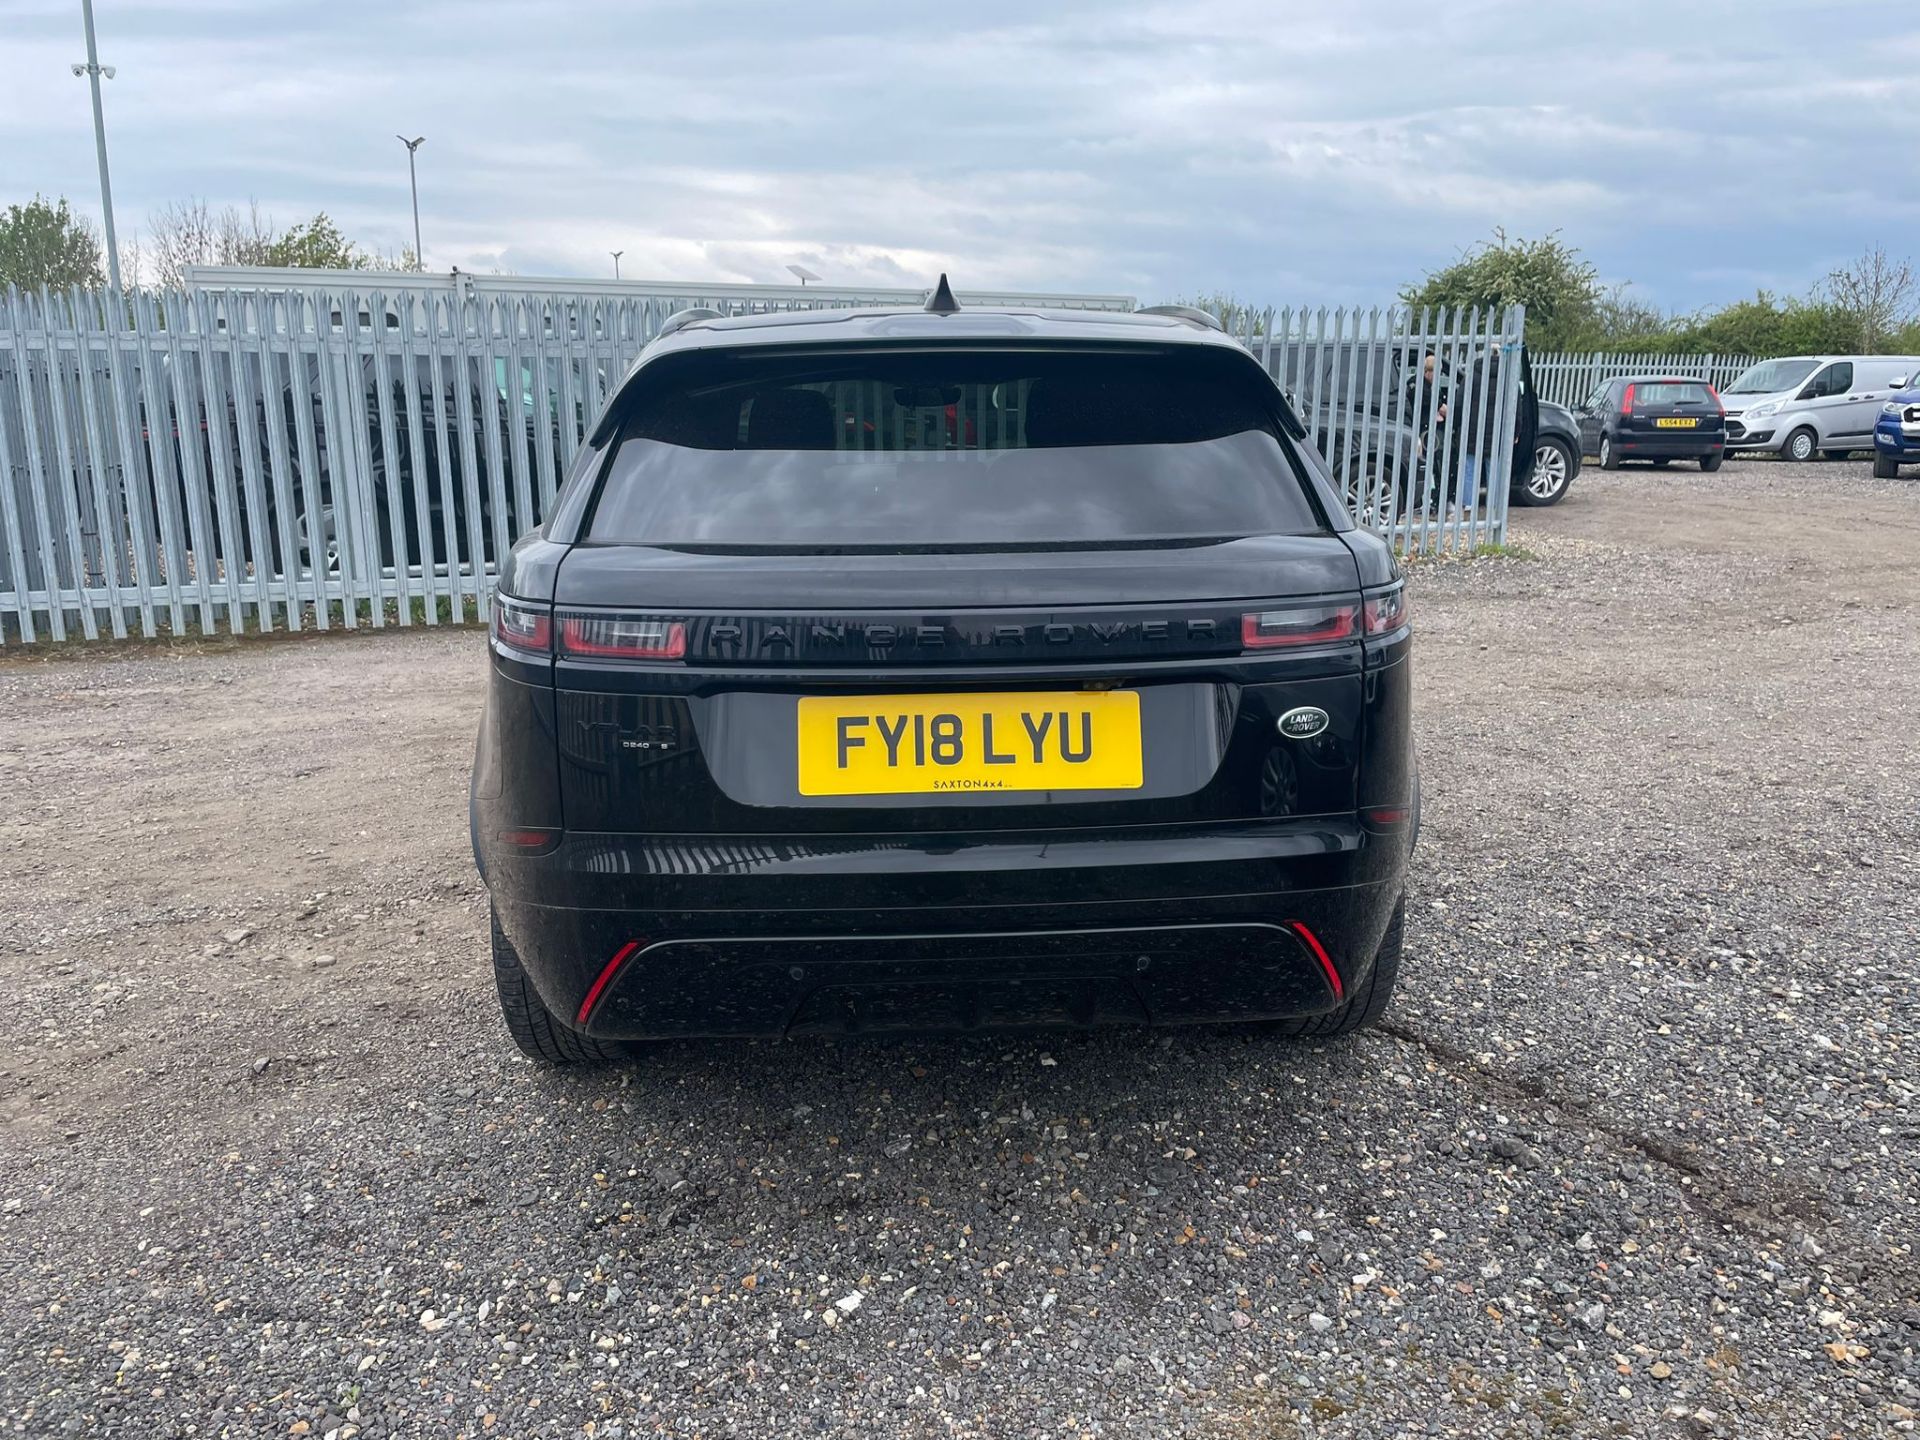 Land Rover Range Rover Velar 2.0 D240 R-Dynamic S 2018 '18 Reg' 4WD - Panoramic Roof- ULEZ Compliant - Image 6 of 33